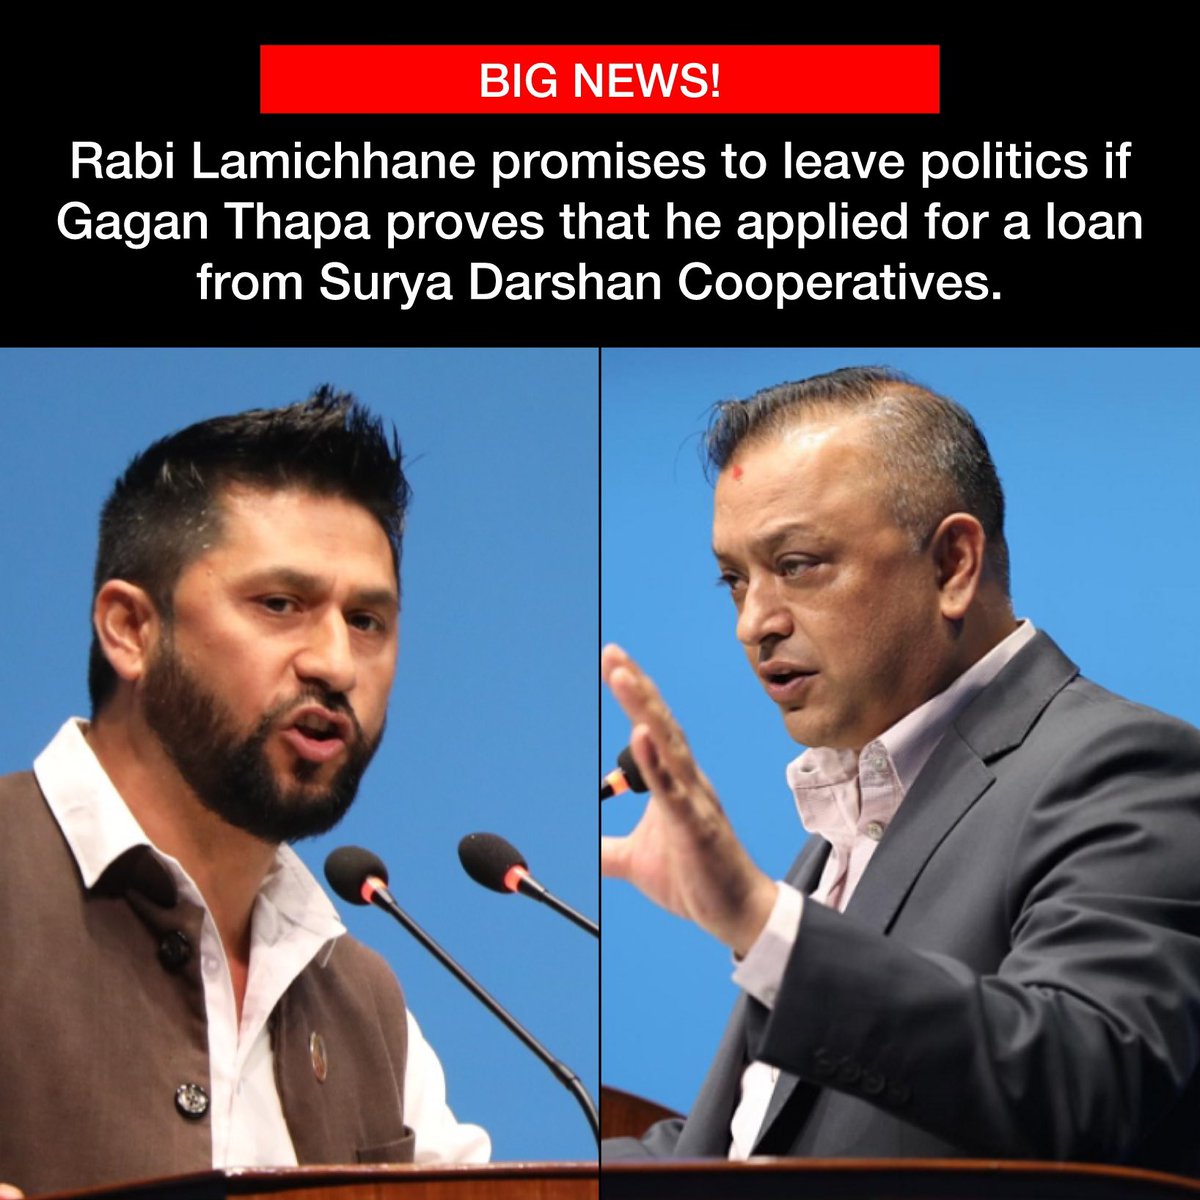 CHALLENGE! Rabi Lamichhane has said that he’ll quit politics if Gagan Thapa proves he applied for a loan from Surya Darshan Cooperatives. He also challenged Gagan Thapa to leave politics if can’t prove the same. What do you think about this? #nonextquestion